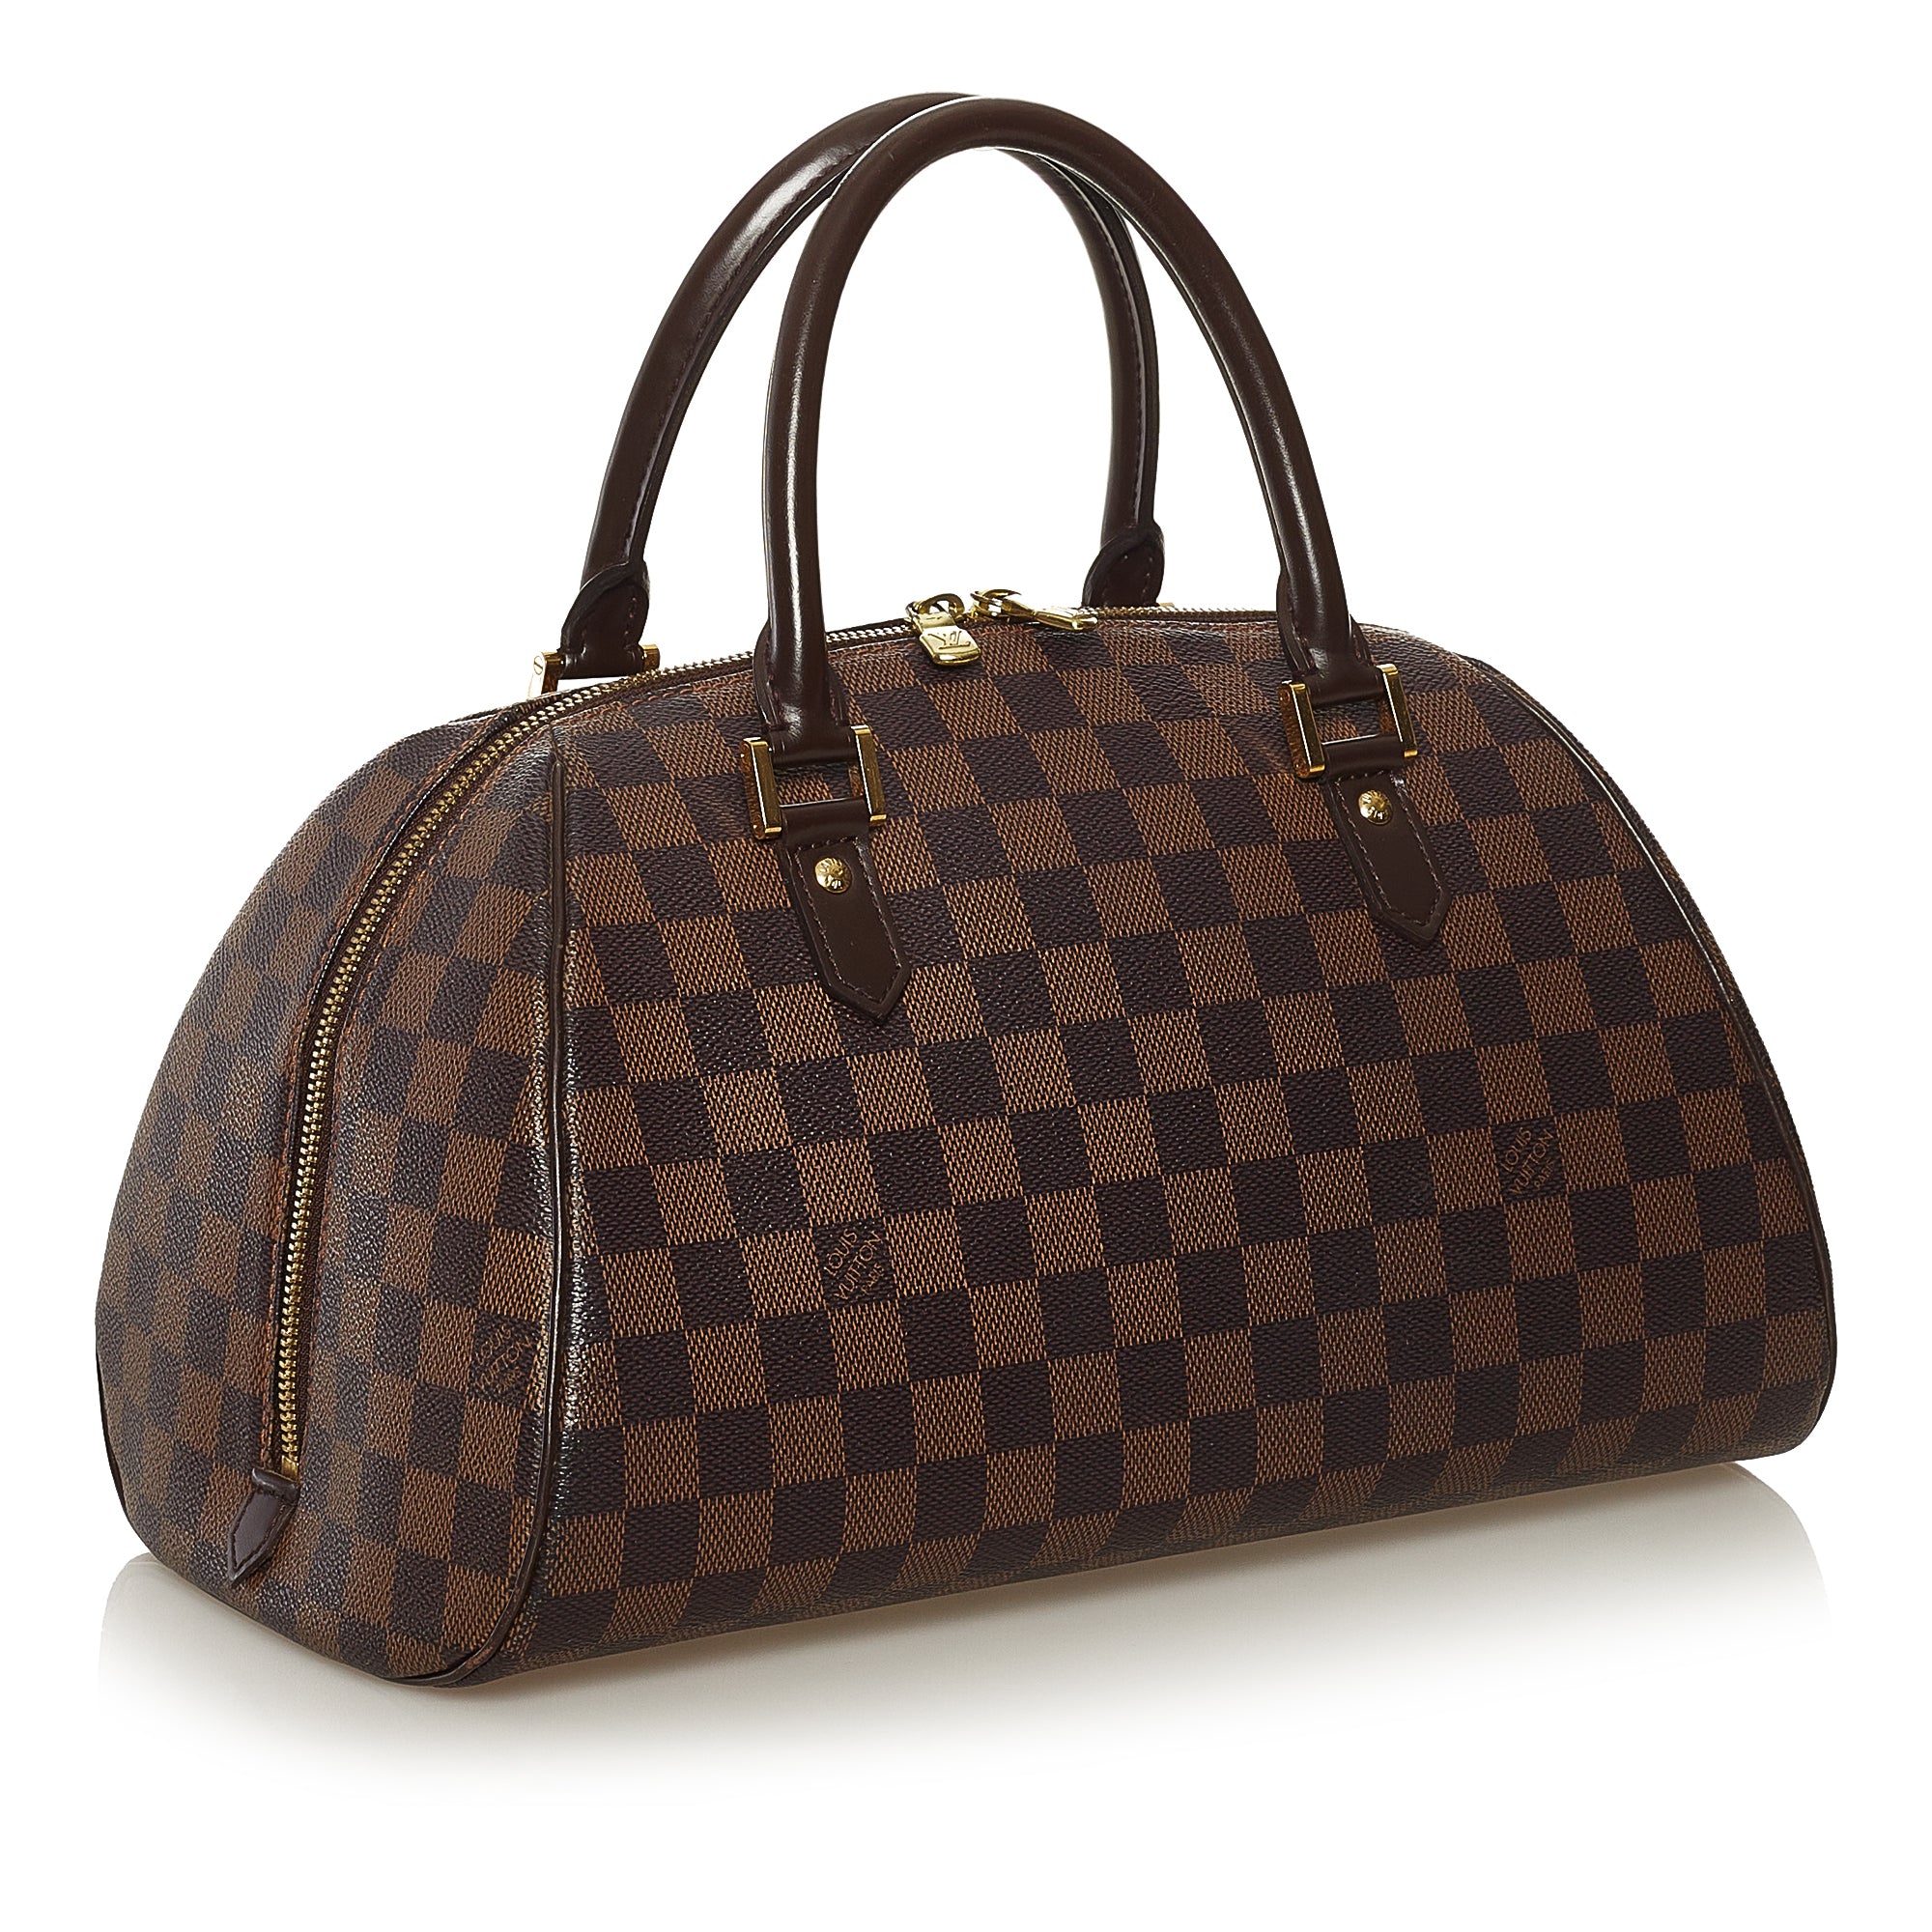 Authentic Louis Vuitton Damier Ebene Neverfull MM with Red Interior Tote  N51105  eBay